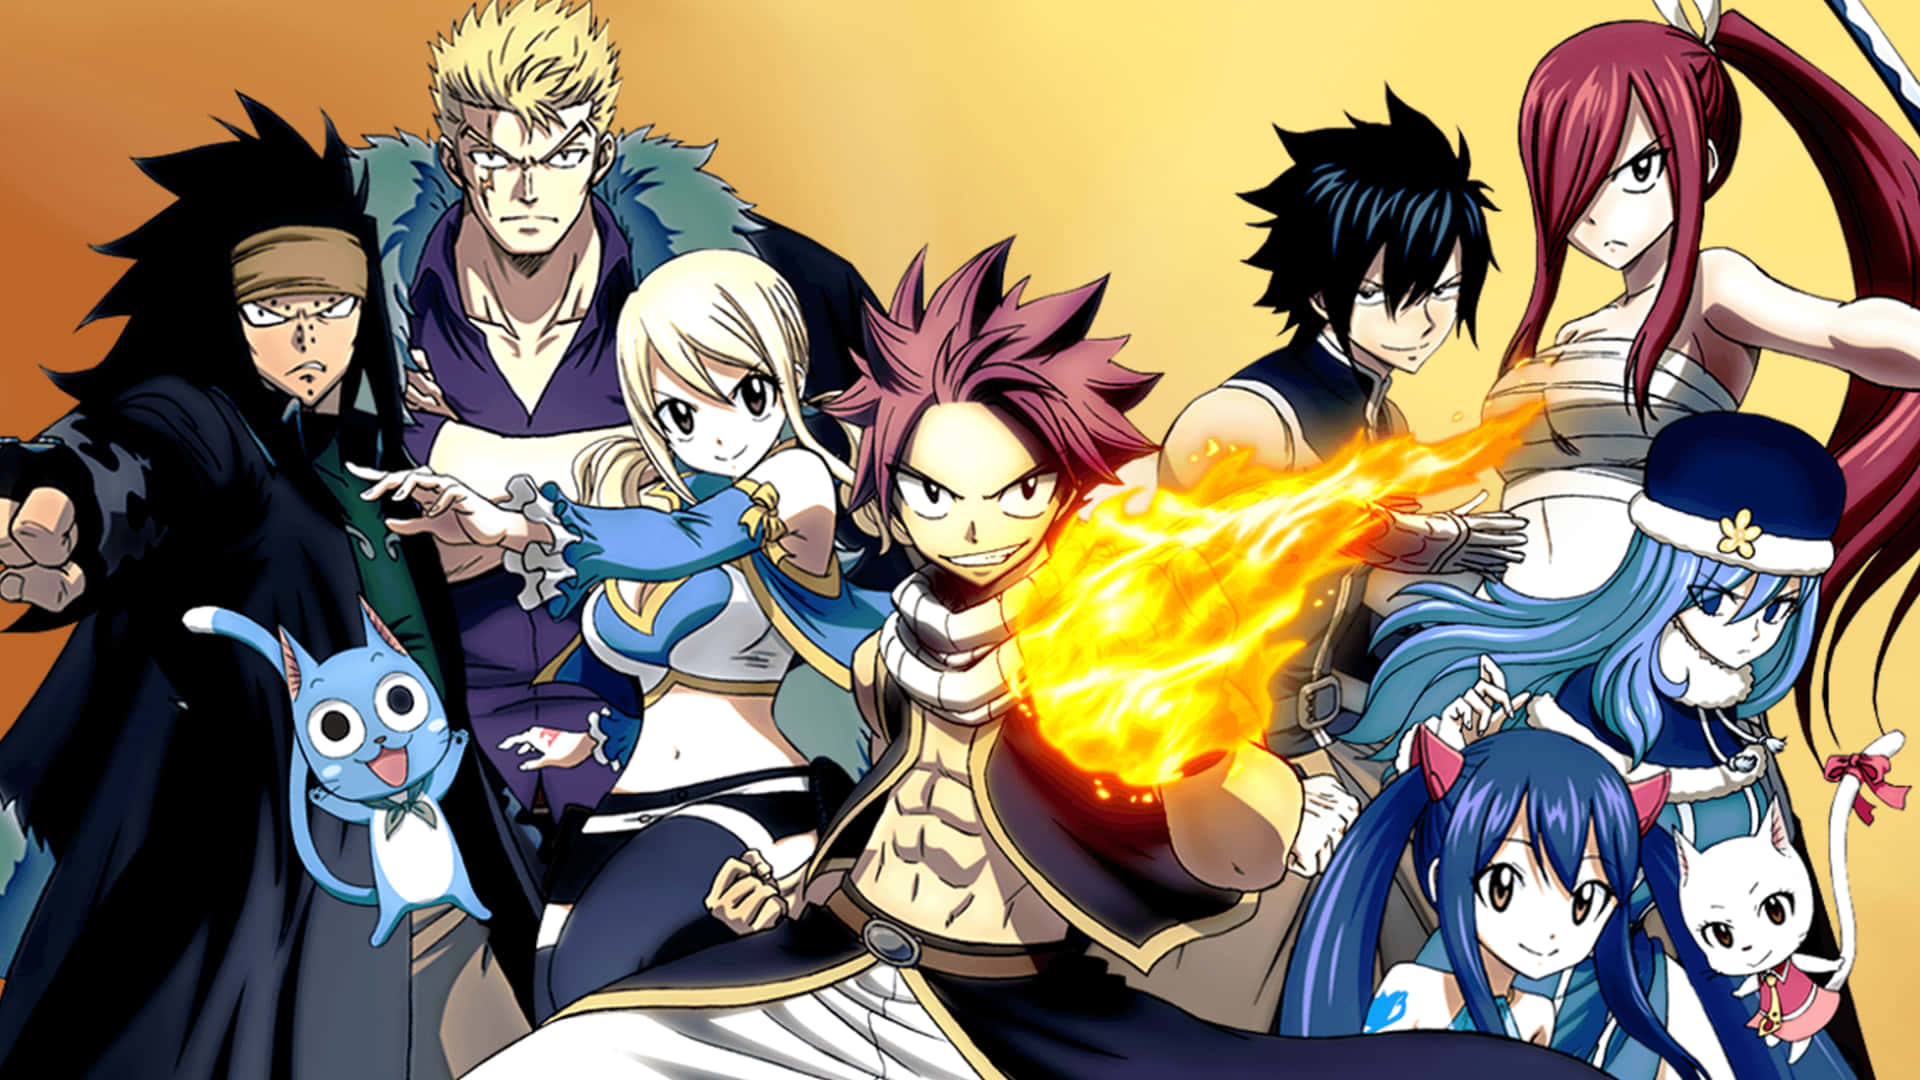 100+] Fairy Tail Backgrounds